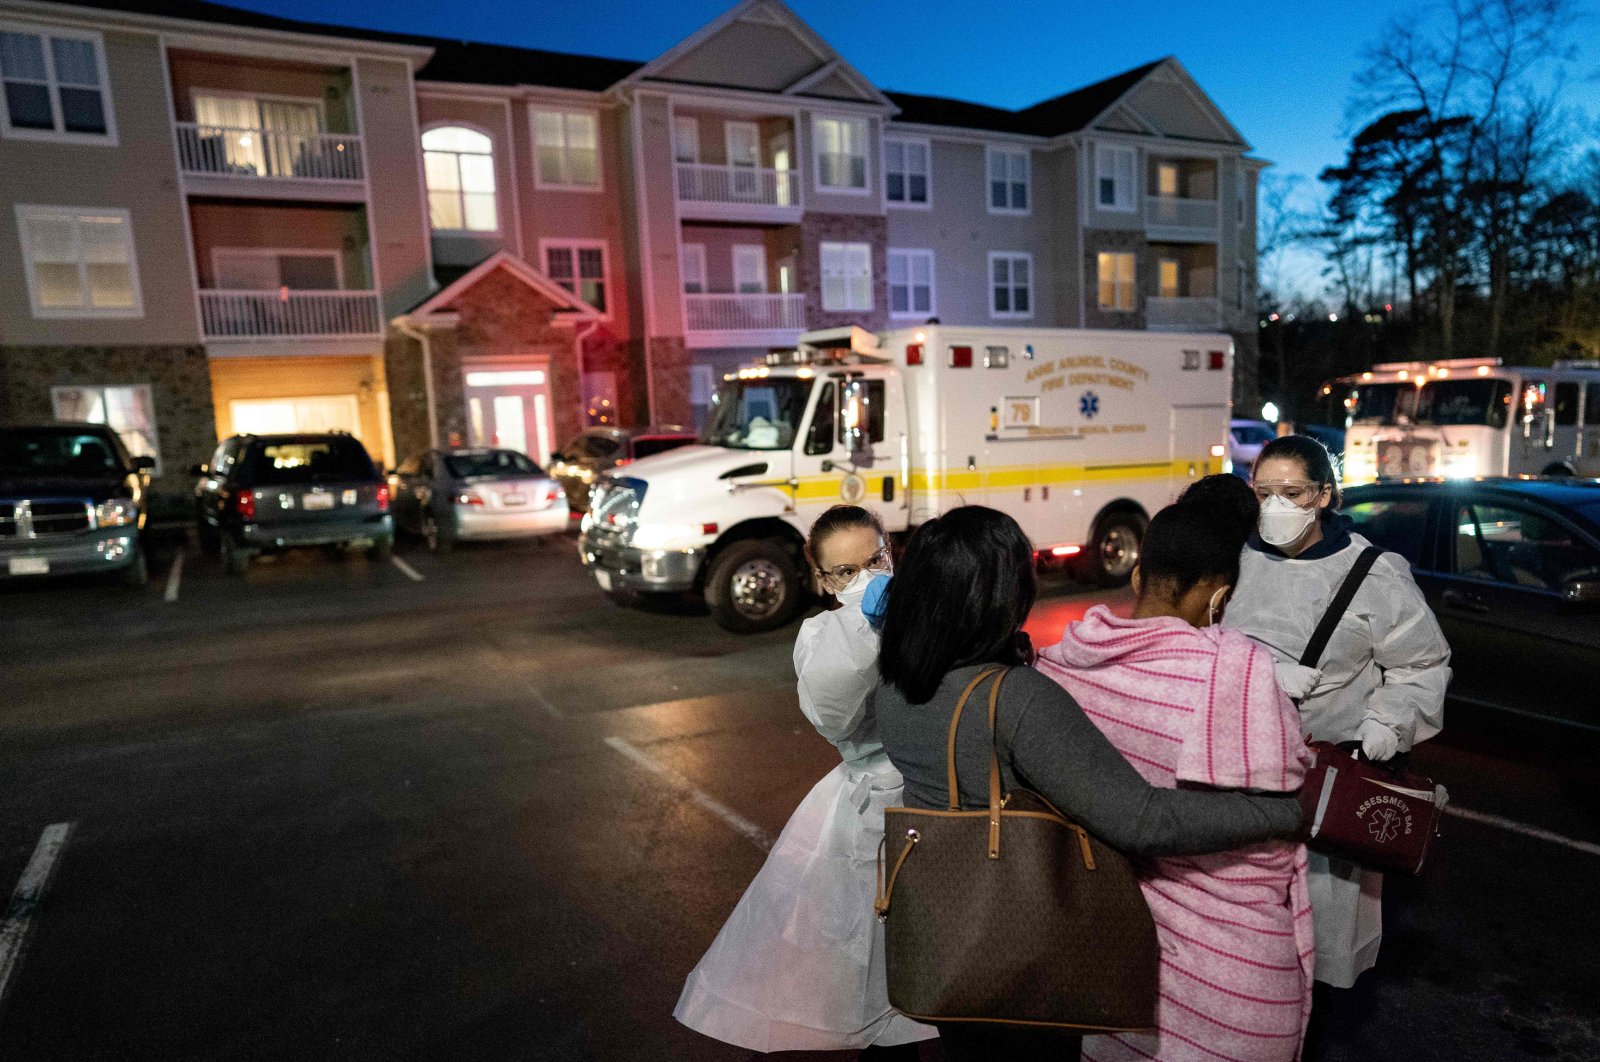 Emergency medical technicians with Anne Arundel County Fire Department assess a young woman experiencing COVID-19 symptoms in Glen Burnie, Maryland on April 10, 2020. (AFP Photo)